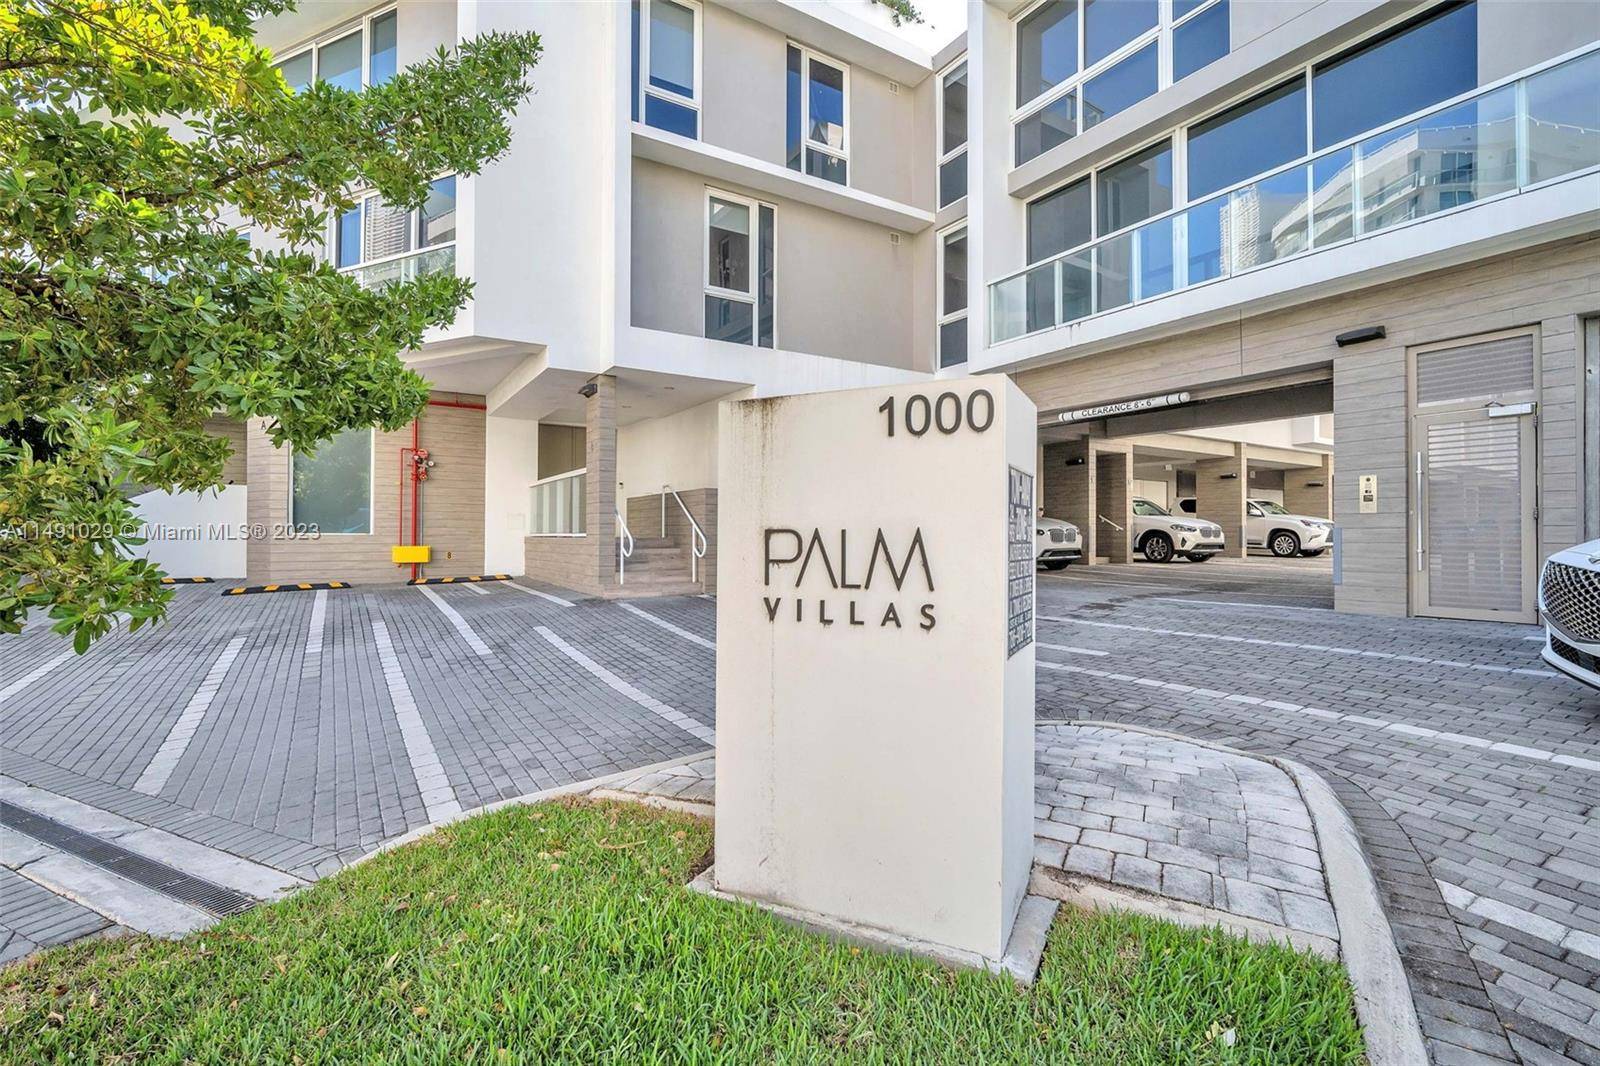 Live luxuriously at PALM VILLAS, Bay Harbor Islands, steps from the beach.